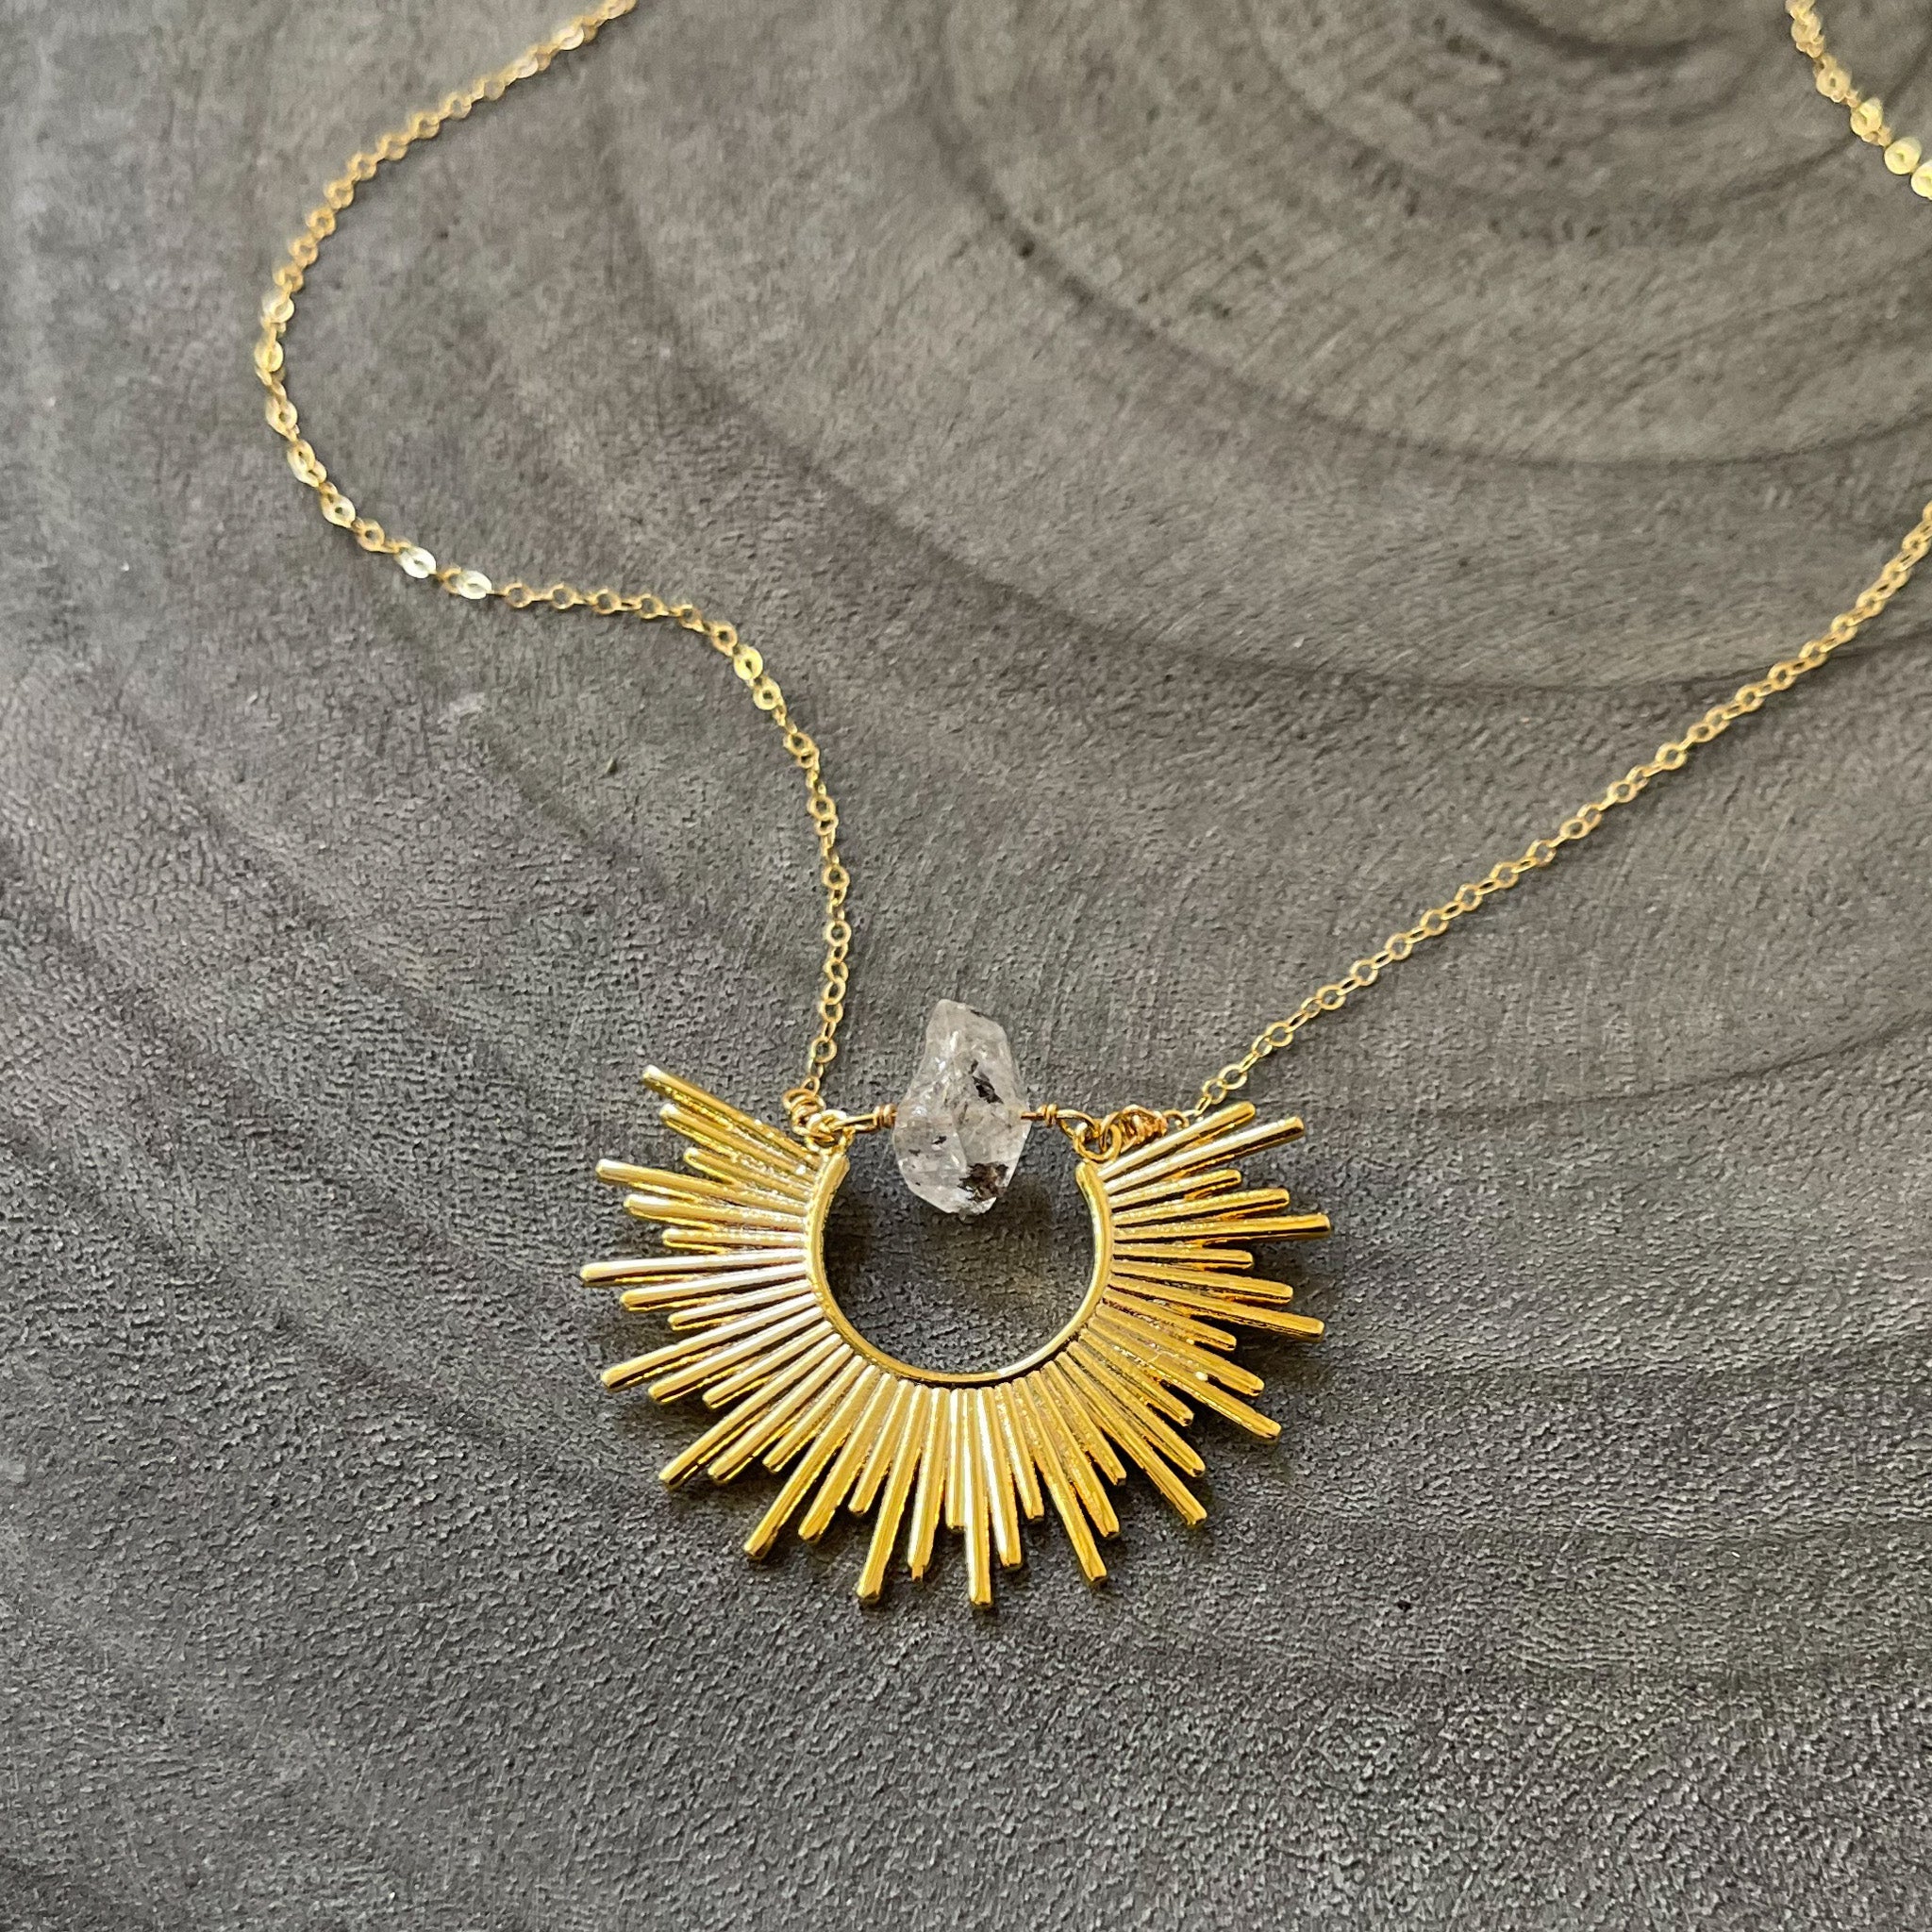 Herkimer Diamong Gold Starburst Necklace, Bohemian Crystal Necklace